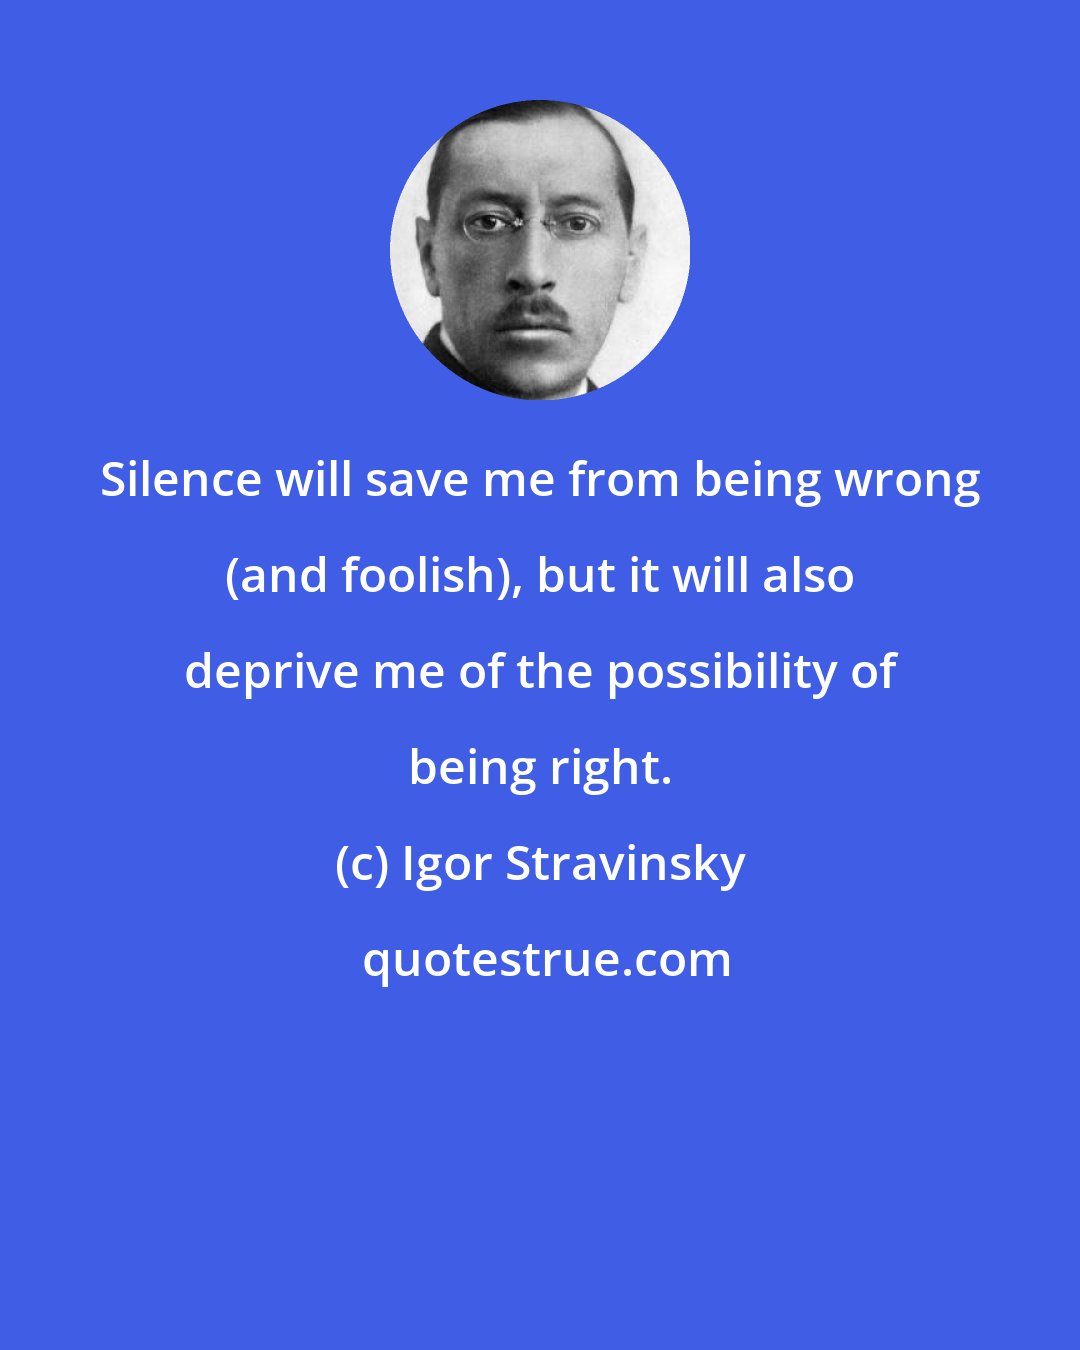 Igor Stravinsky: Silence will save me from being wrong (and foolish), but it will also deprive me of the possibility of being right.